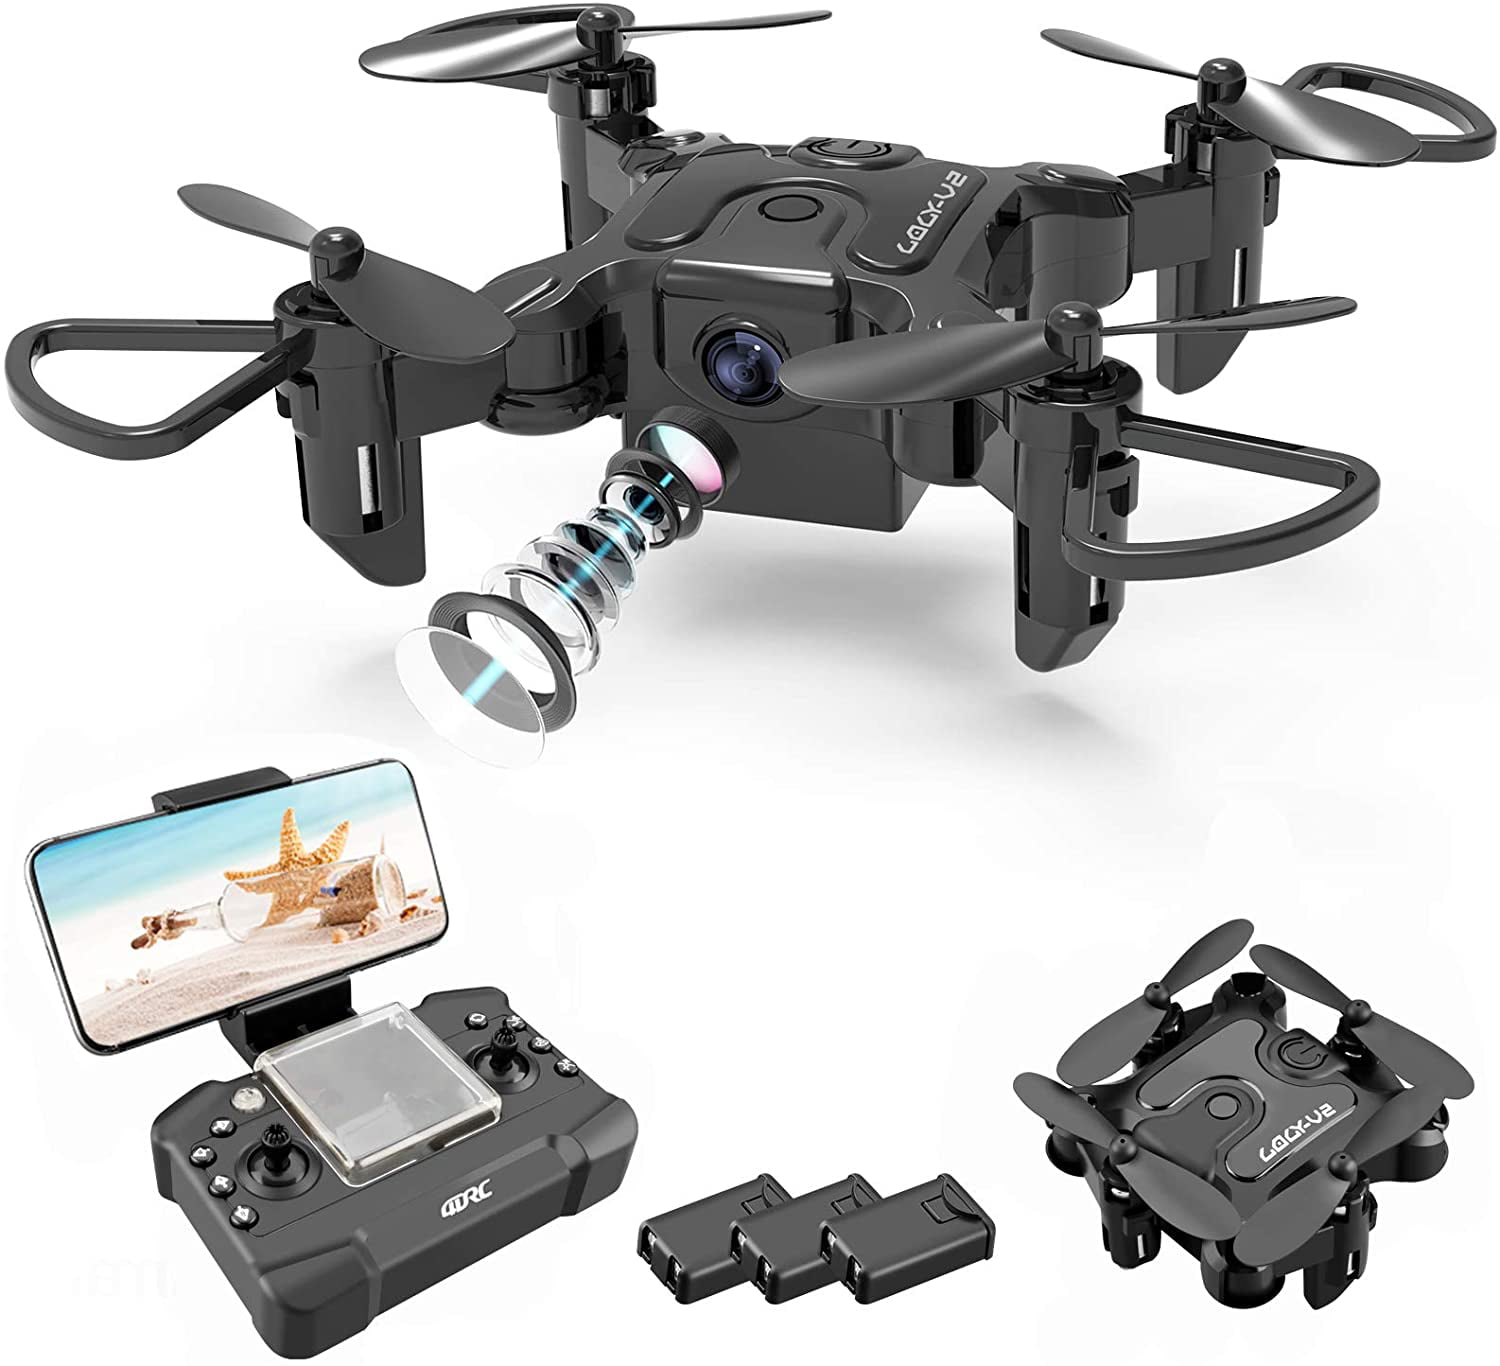 Speed Adjustment Altitude Hold App Control Mini Drone for Kids 3D Flip 4K Dual Cameras FPV RC Quadcopter Foldable Remote Control Drone Toys Gifts for Boys Girls with Tap Fly 